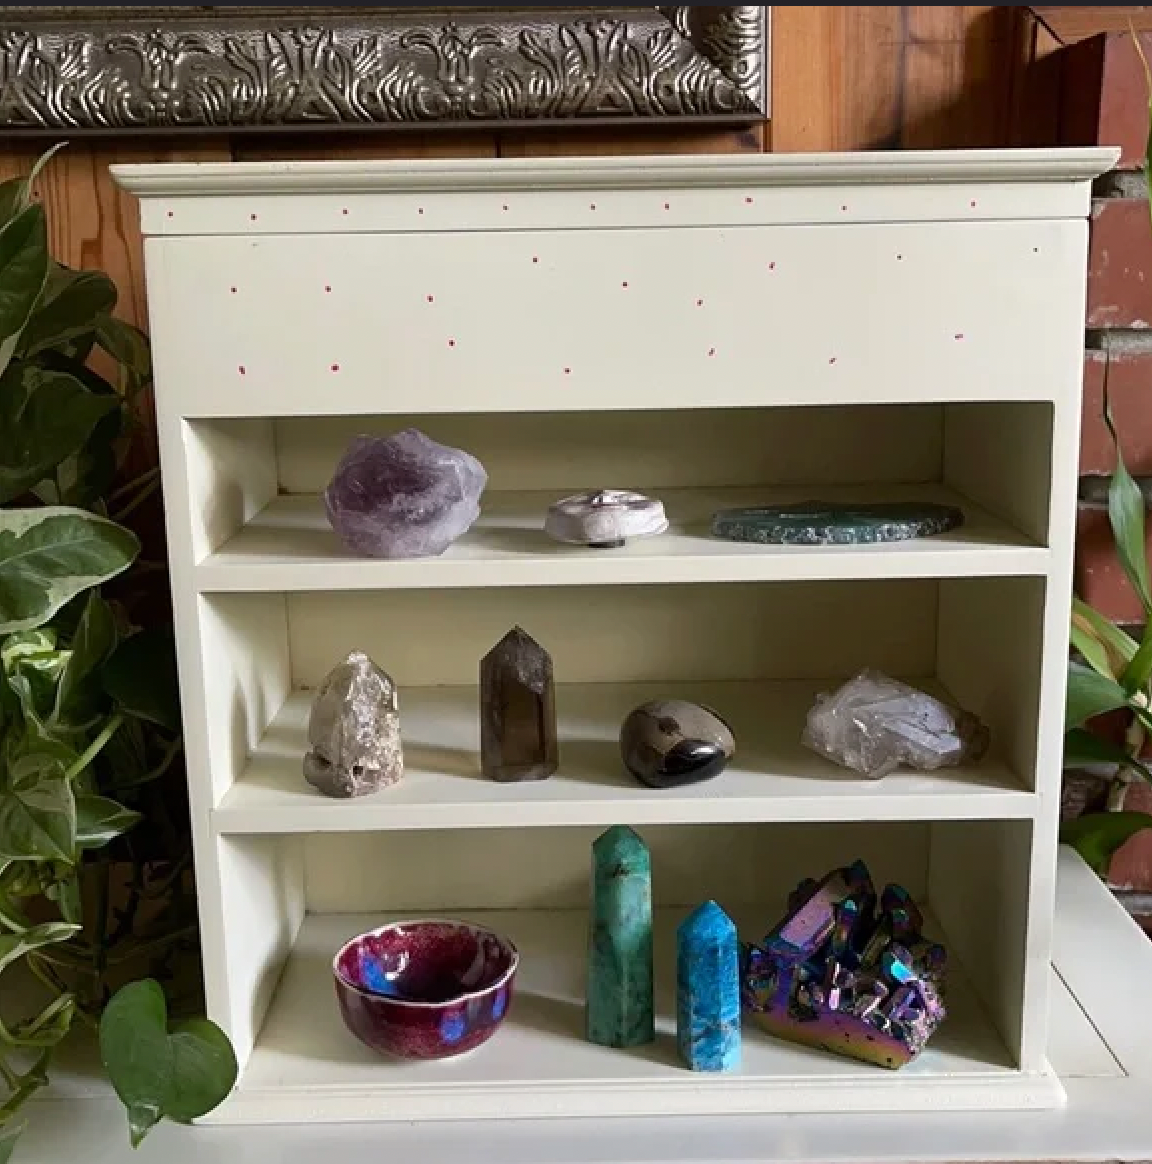 Lovecycled Vintage Goddess Crystal Display Cabinet, Bodhi Lovecycled